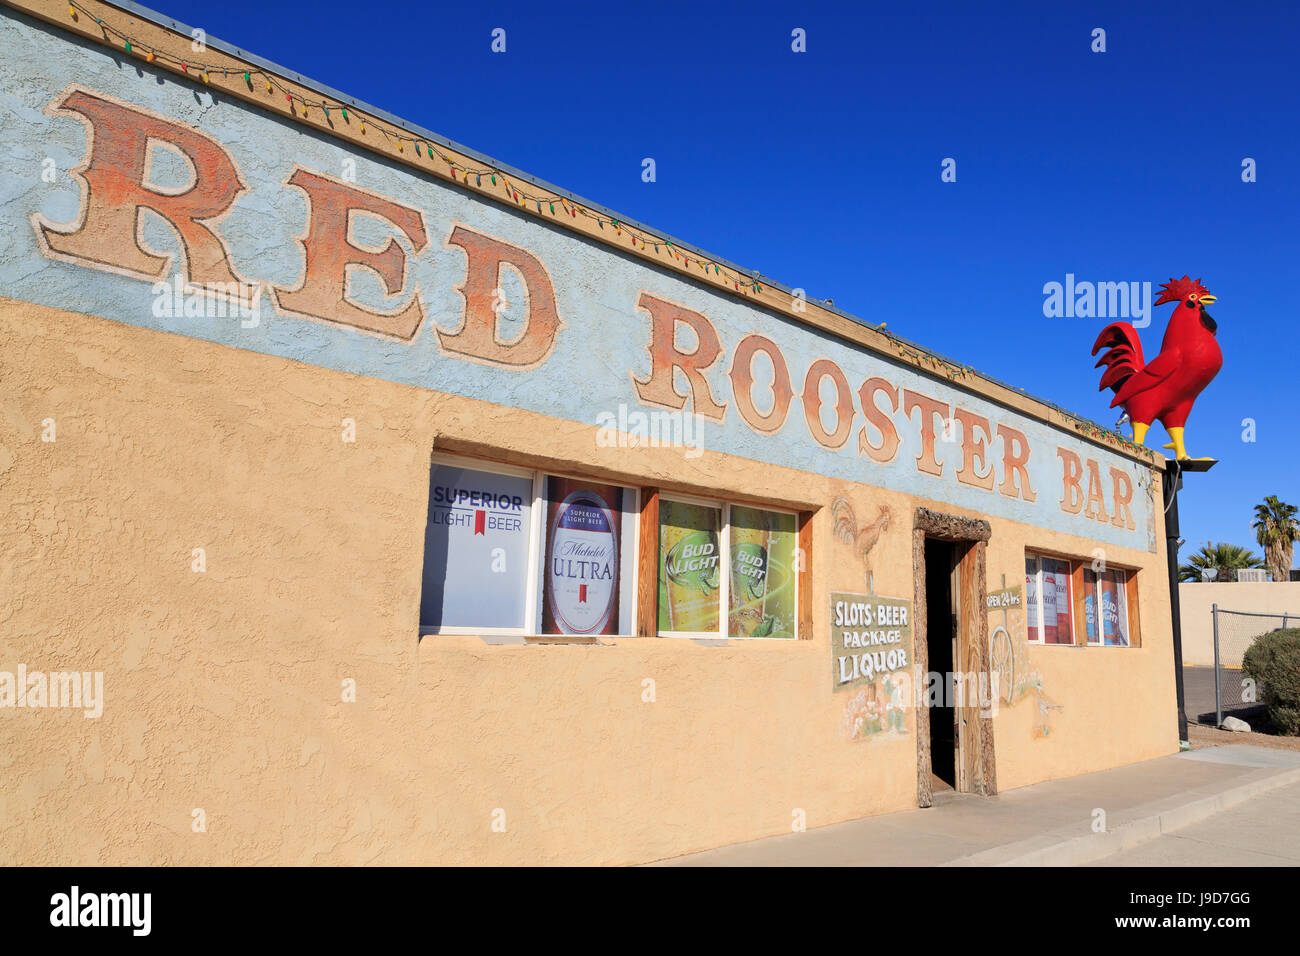 Red Rooster Bar, Overton, Nevada, USA, North America Stock Photo